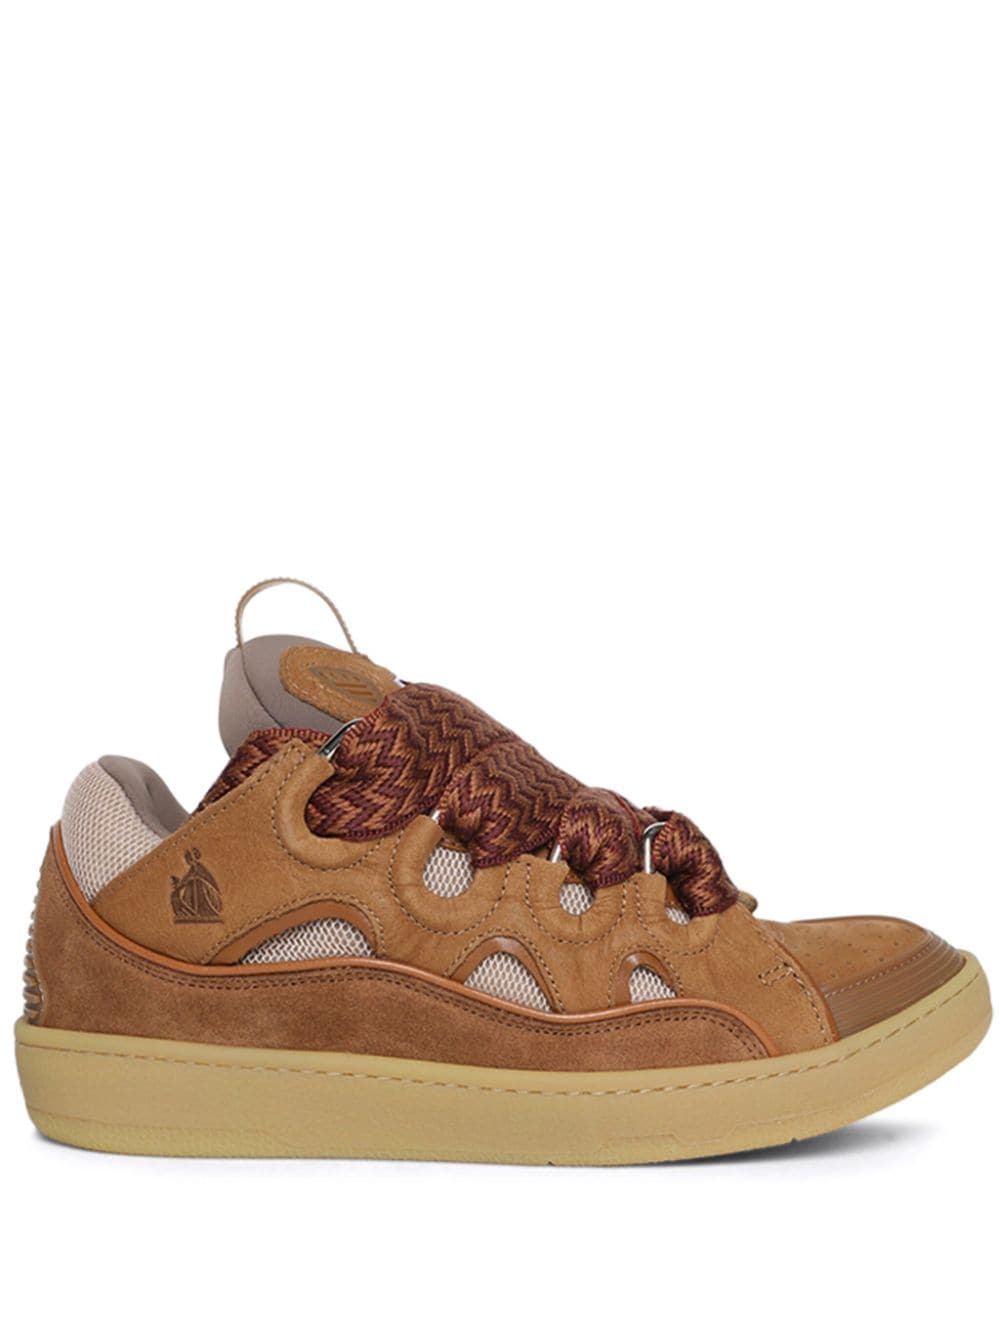 Lanvin Curb Panelled Sneakers In Brown